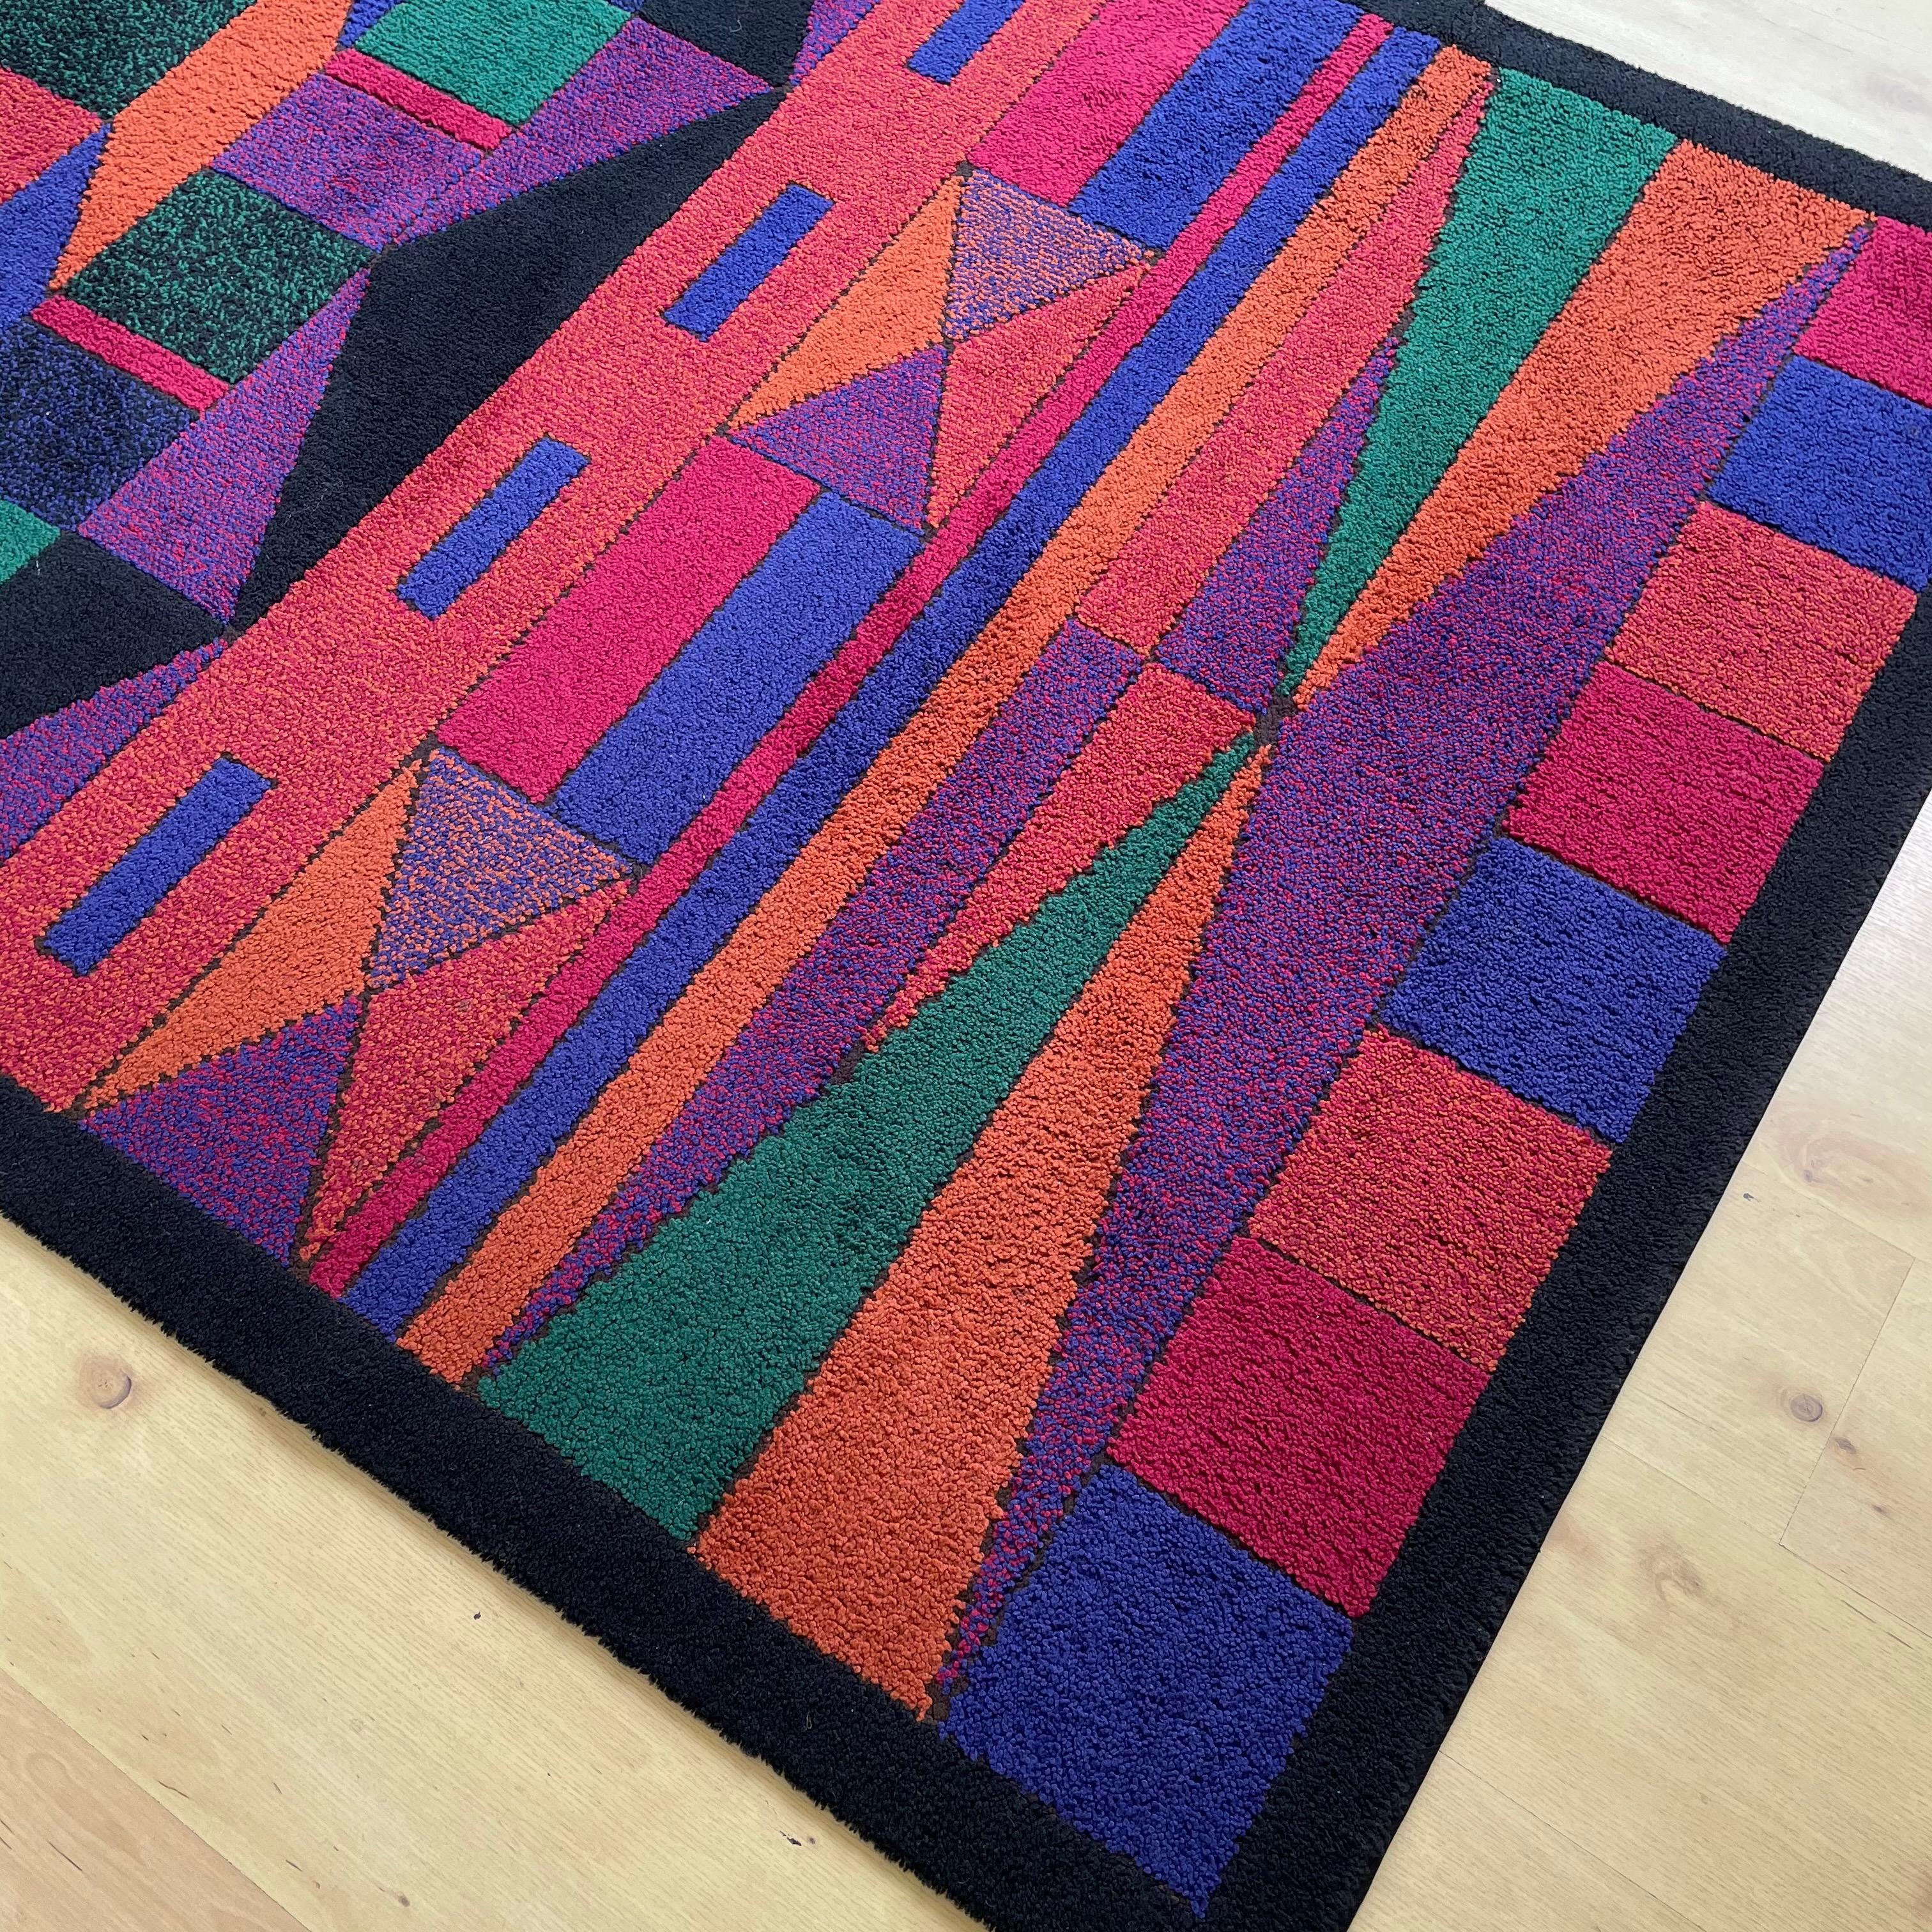 Psychedelic Memphis Style abstract Rug Carpet by Atrium Tefzet, Germany 1980s For Sale 7